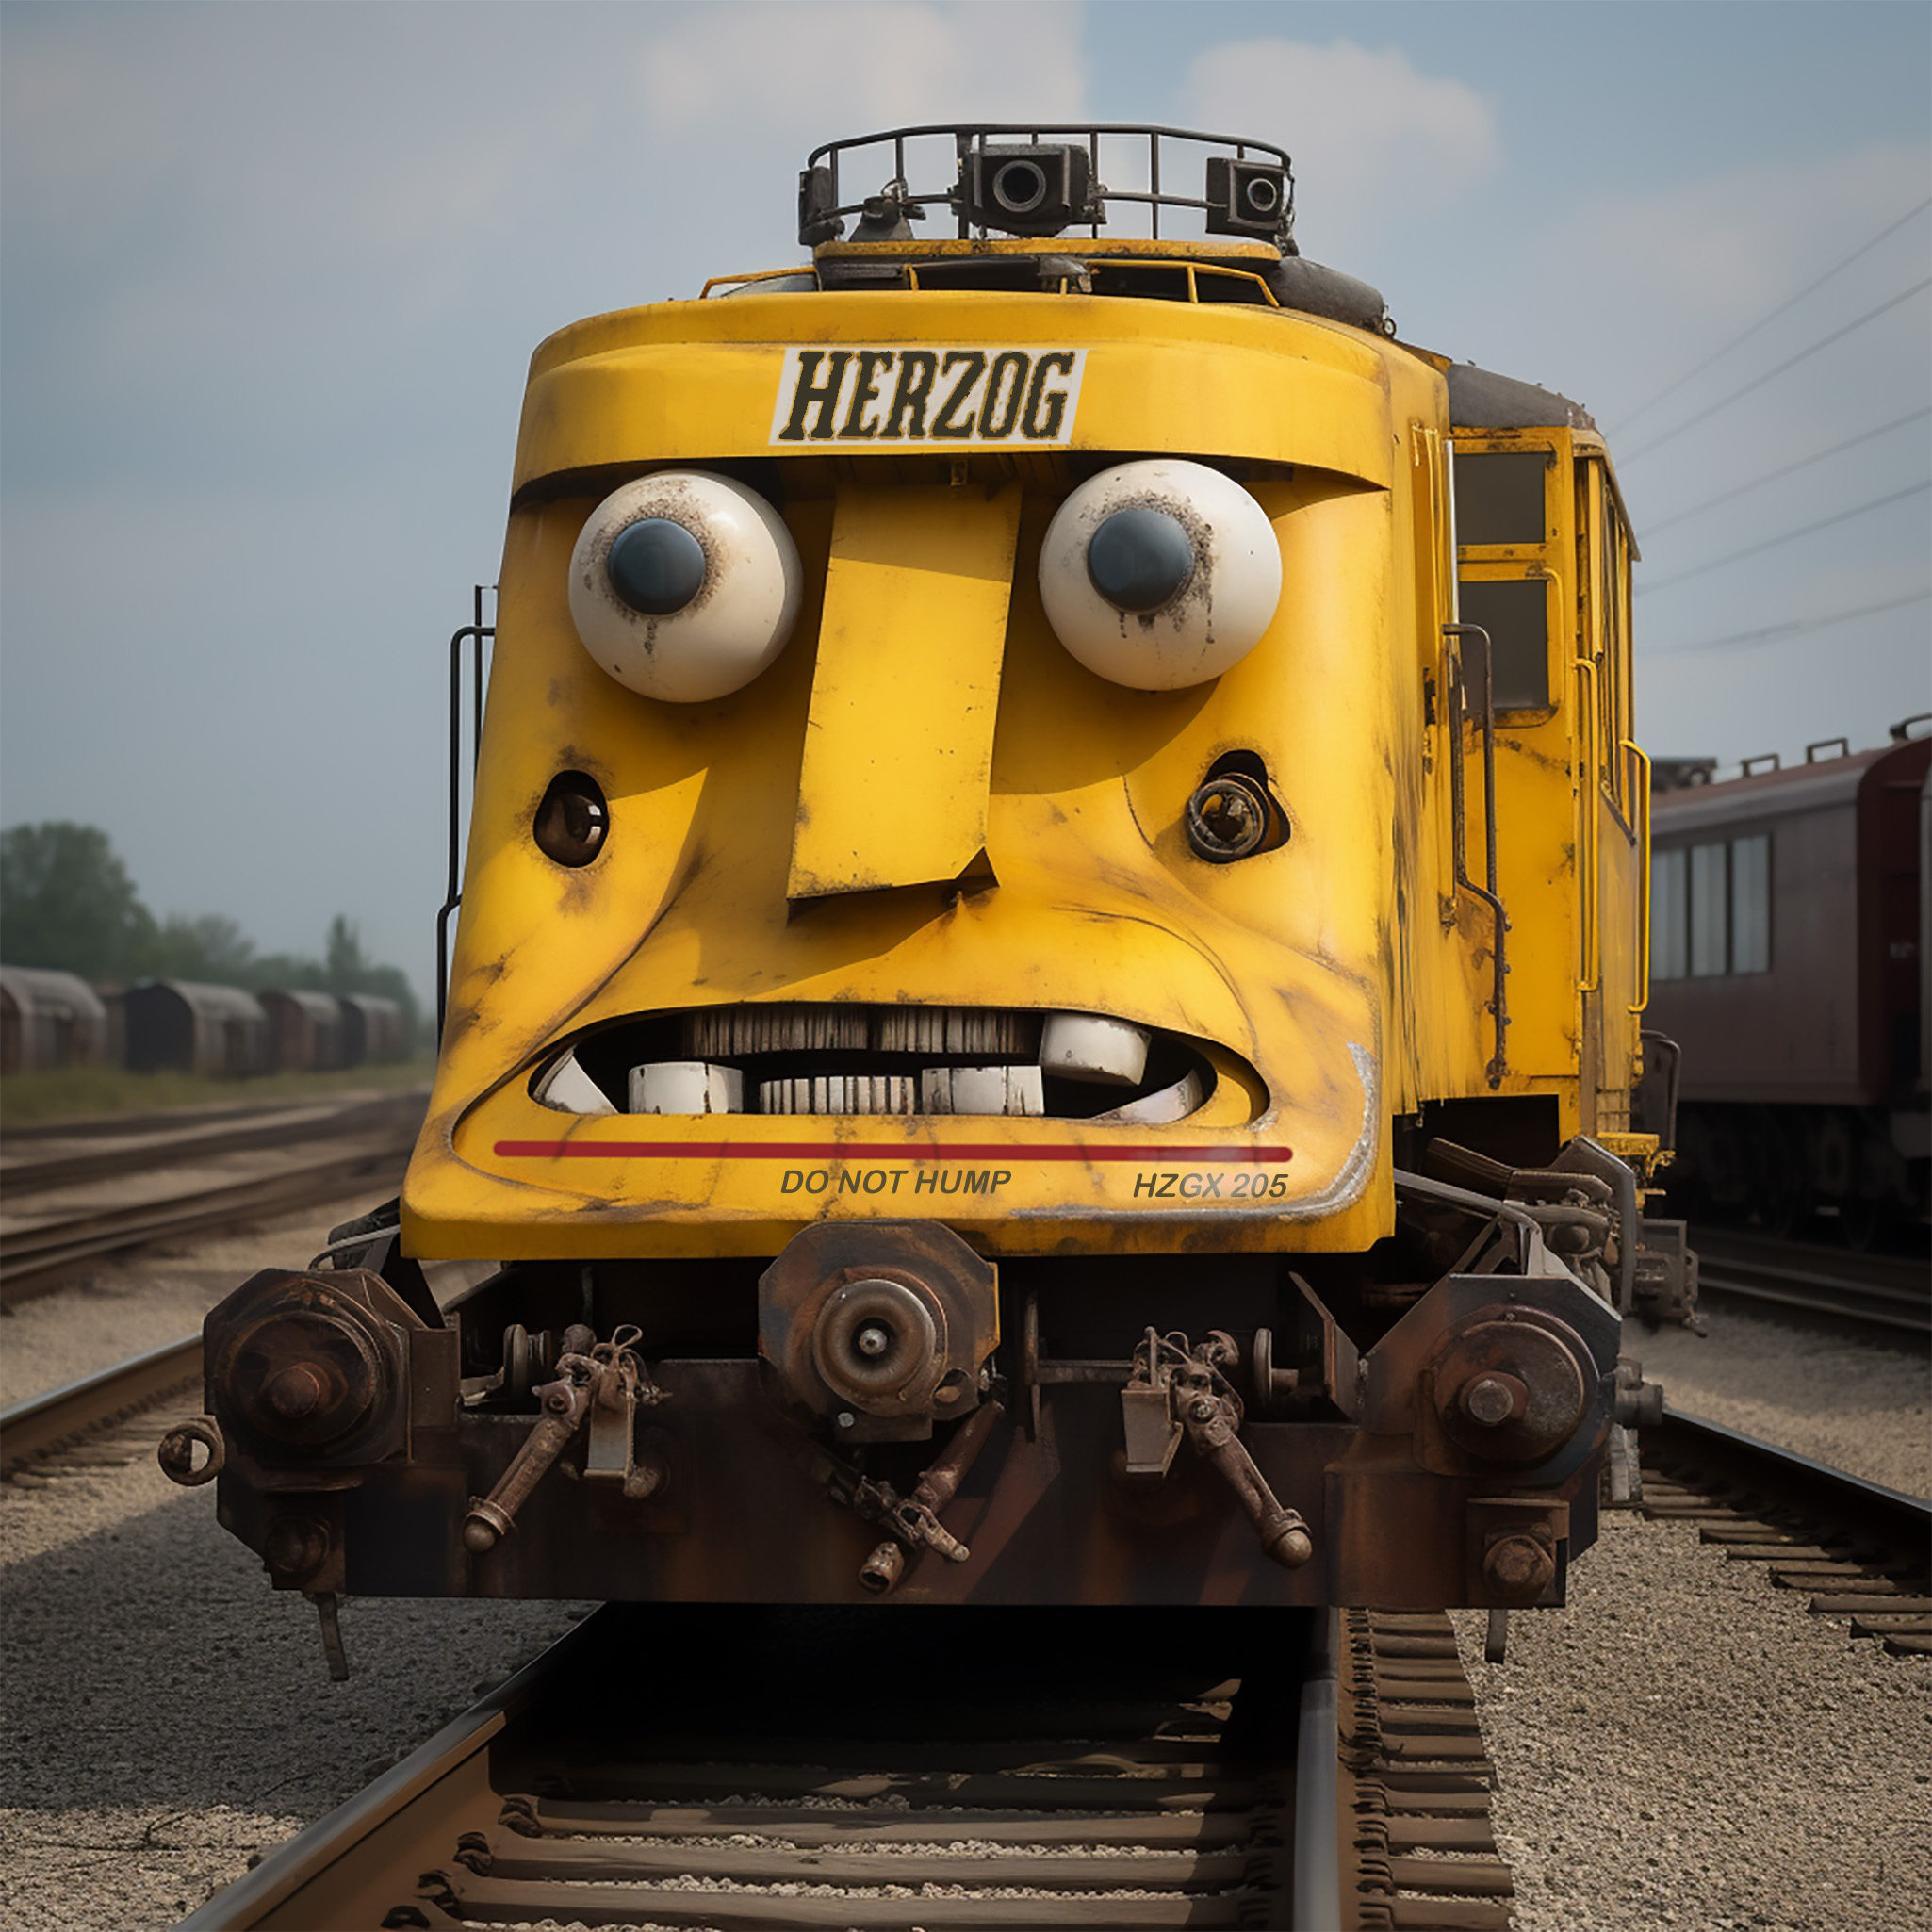 An anthropomorphic yellow train with eyes and a mouth resembling a cartoonish face, marked 'HERZOG' on the front.